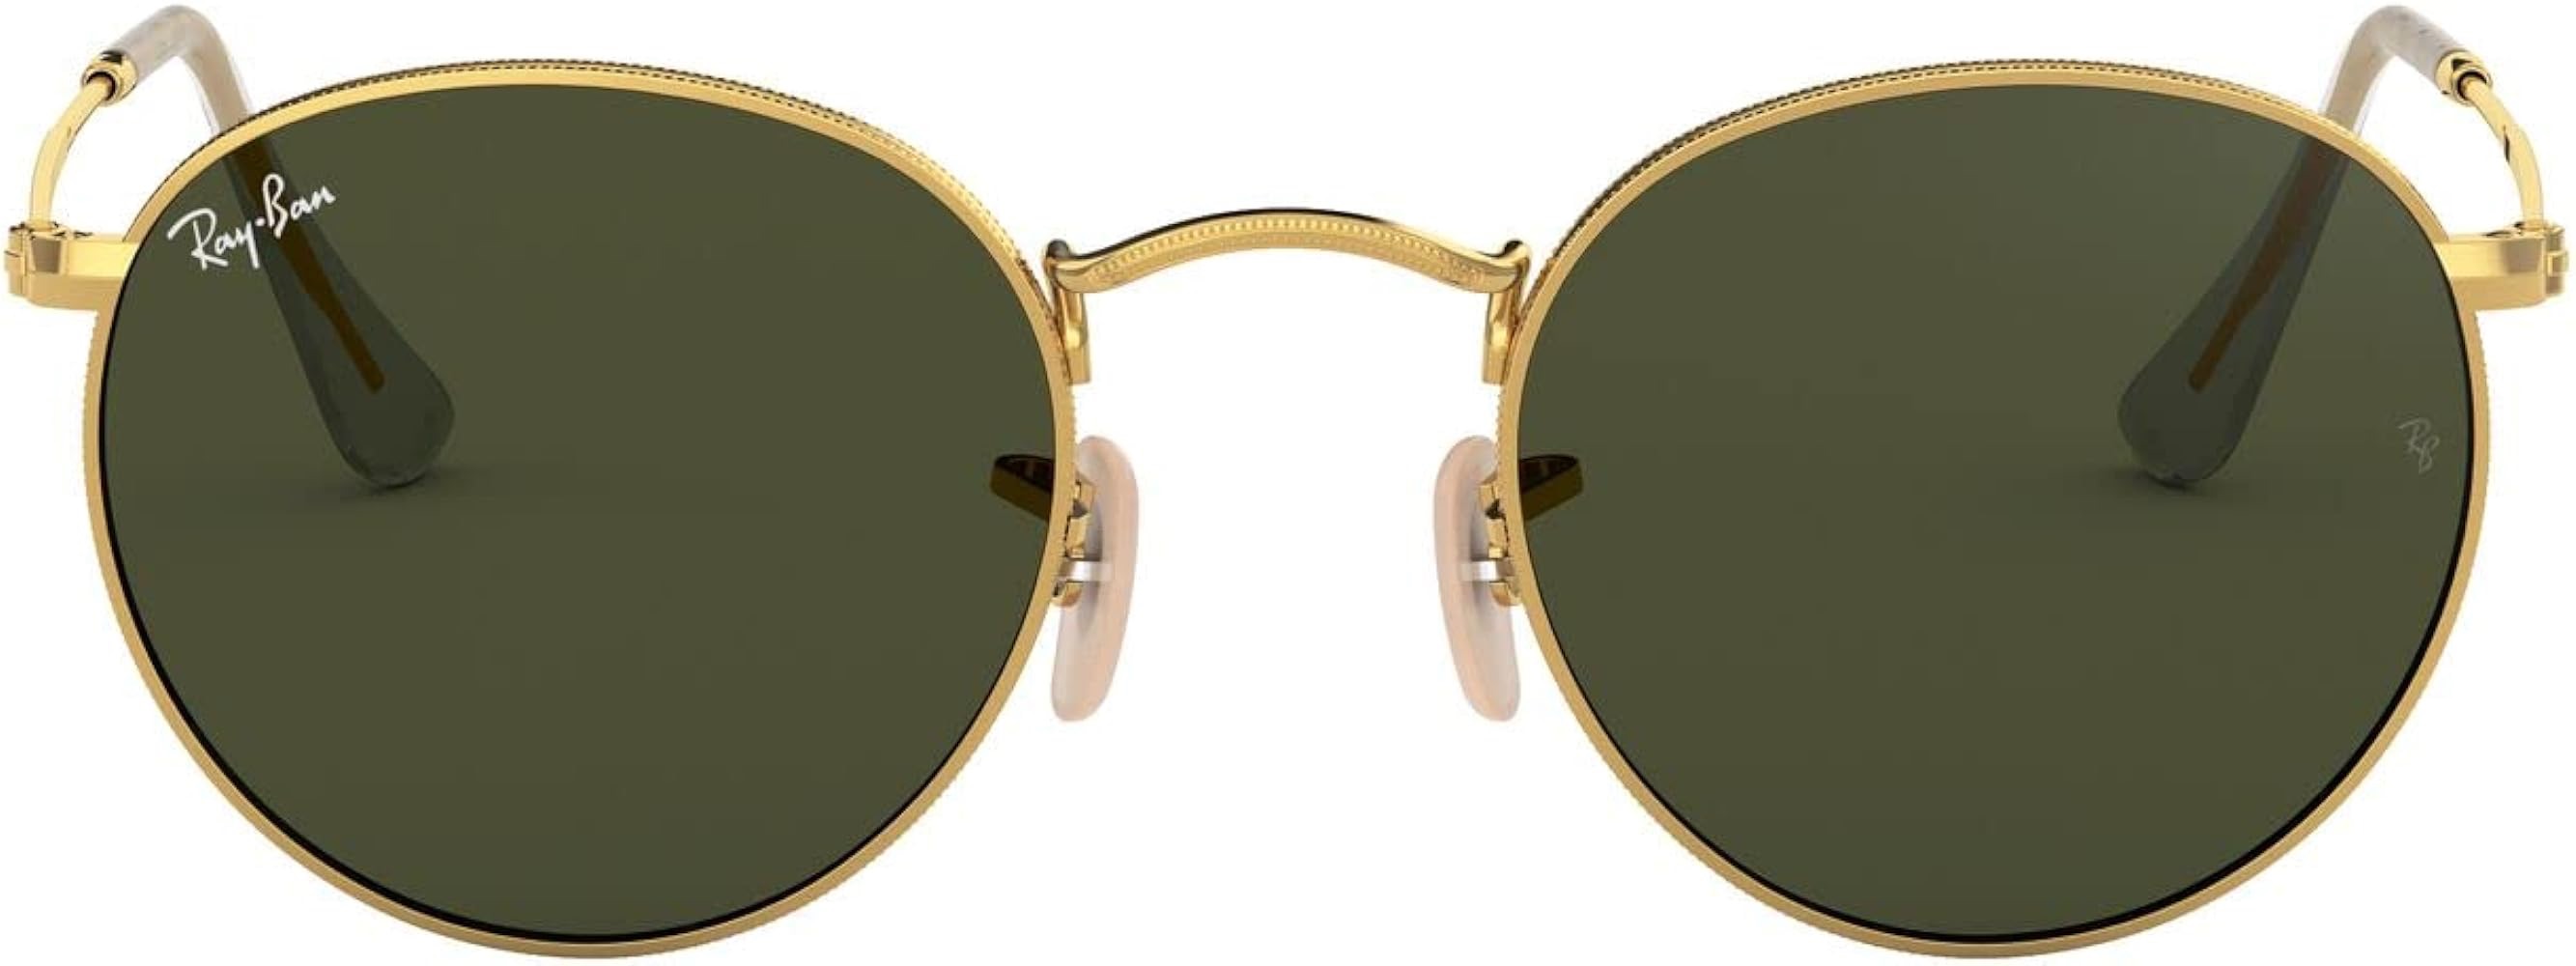 Amazon.com: Ray-Ban Rb3447 Round Metal Sunglasses, Gold/G-15 Green, 47 mm : RAY BAN: Clothing, Shoes & Jewelry